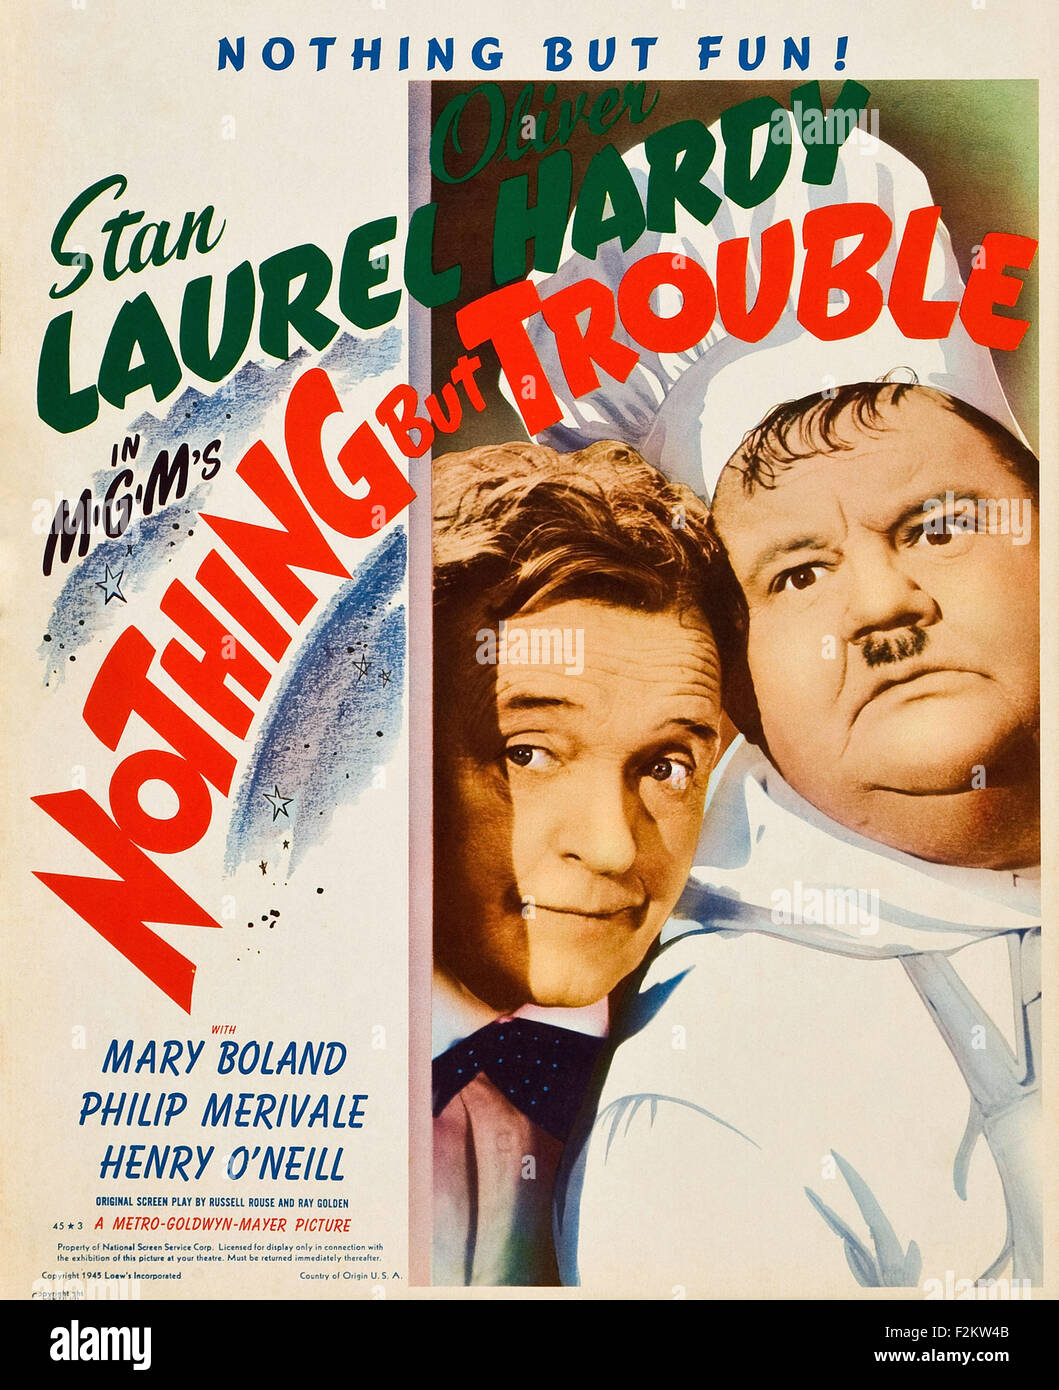 Nothing But Trouble (1944) - Movie Poster Stock Photo